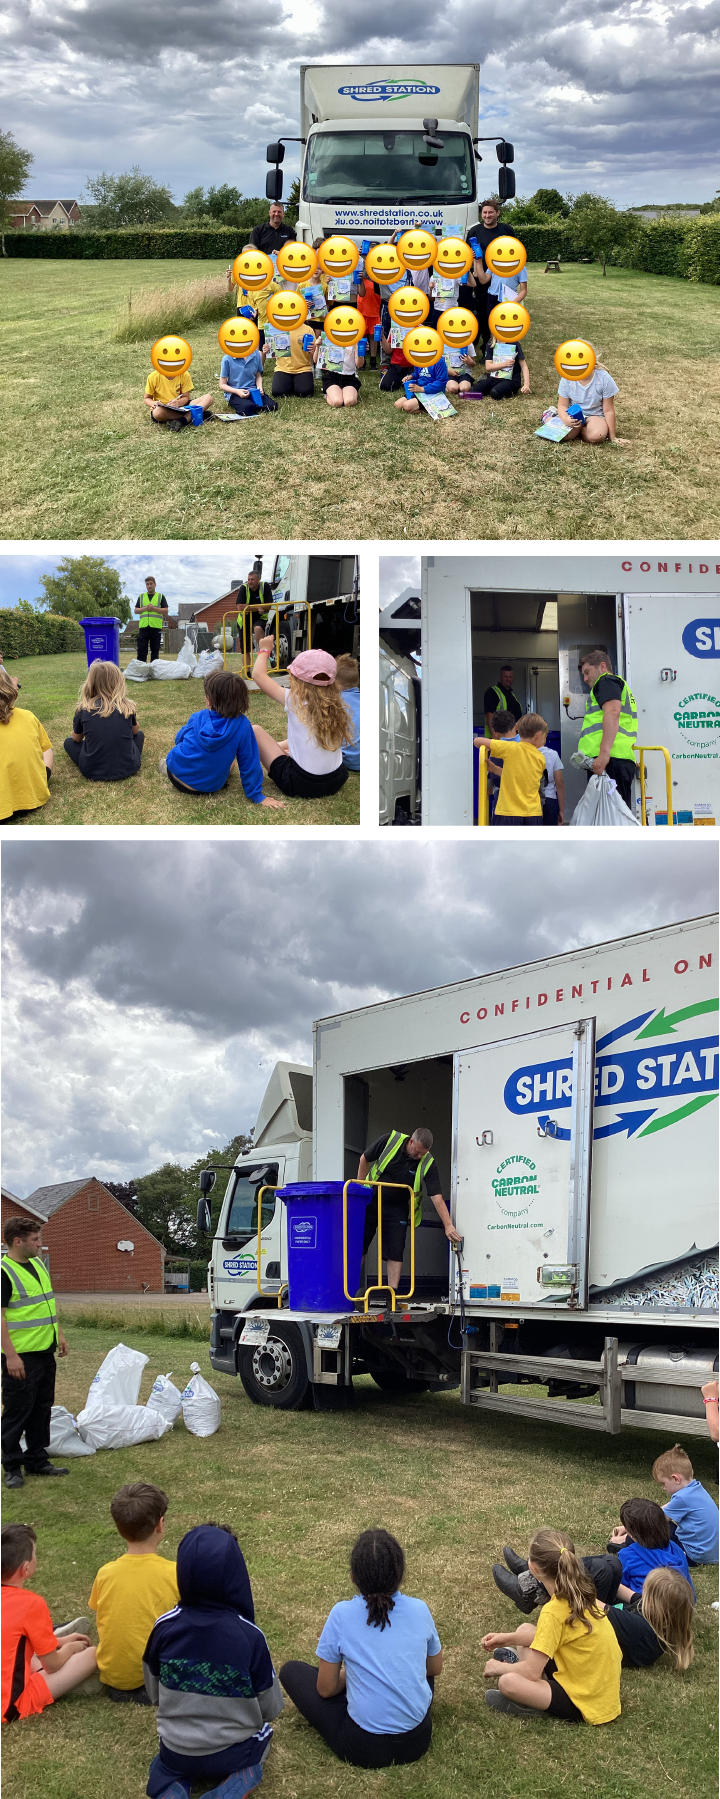 Images of Shred Station operatives, James and Garry, engaging with a class of children.